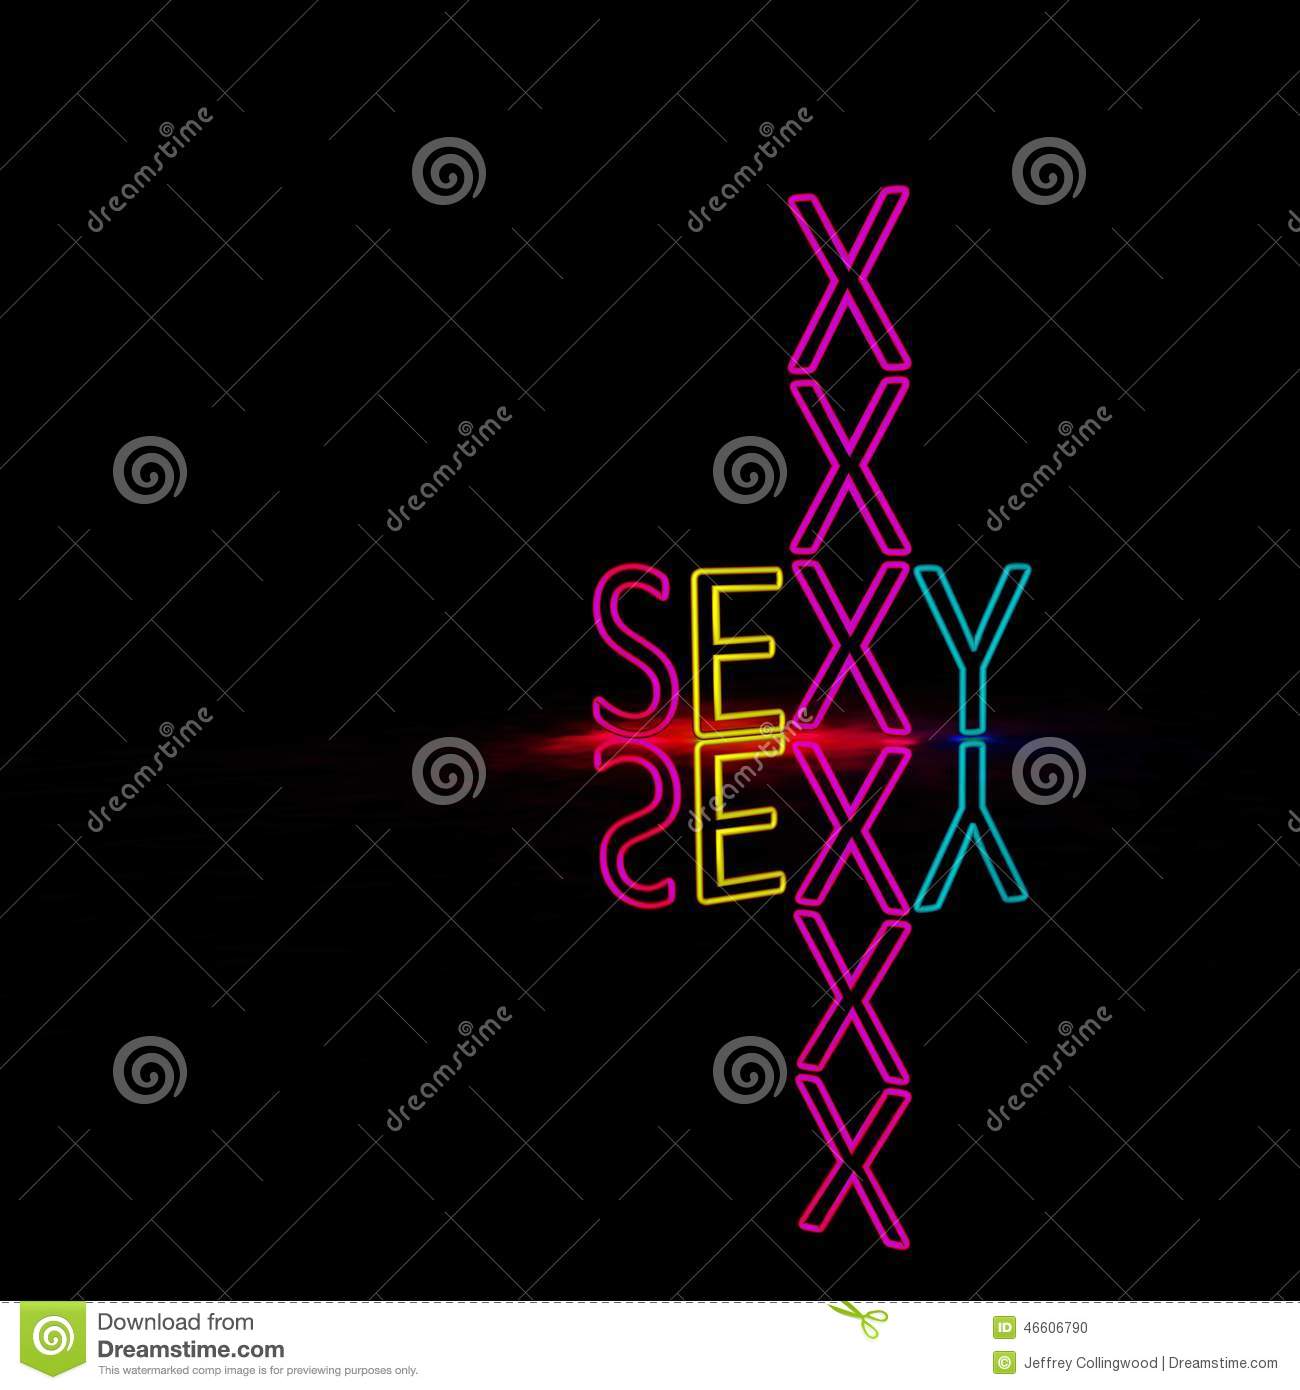 xxx neon lights stock illustration neon sign sexy night spells out reflections copy space